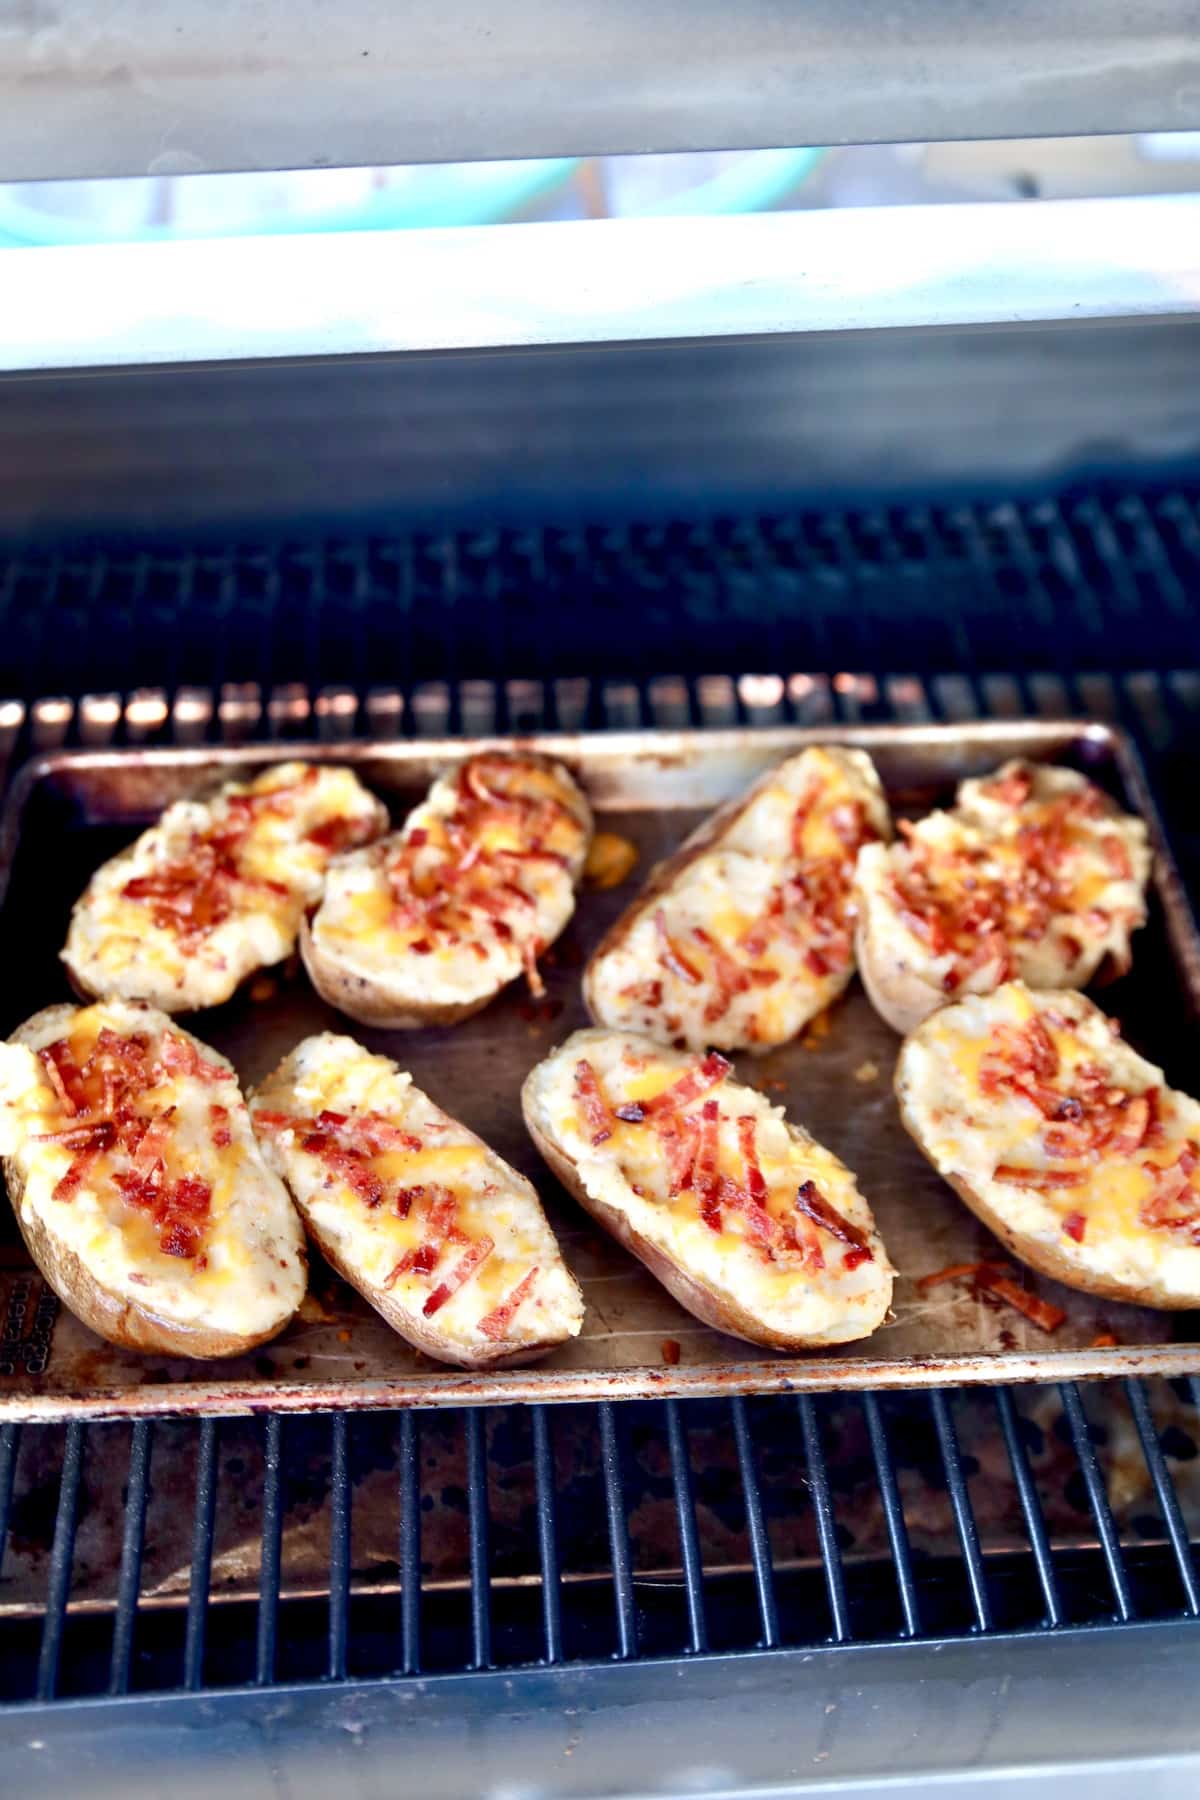 Grilling twice baked potatoes.